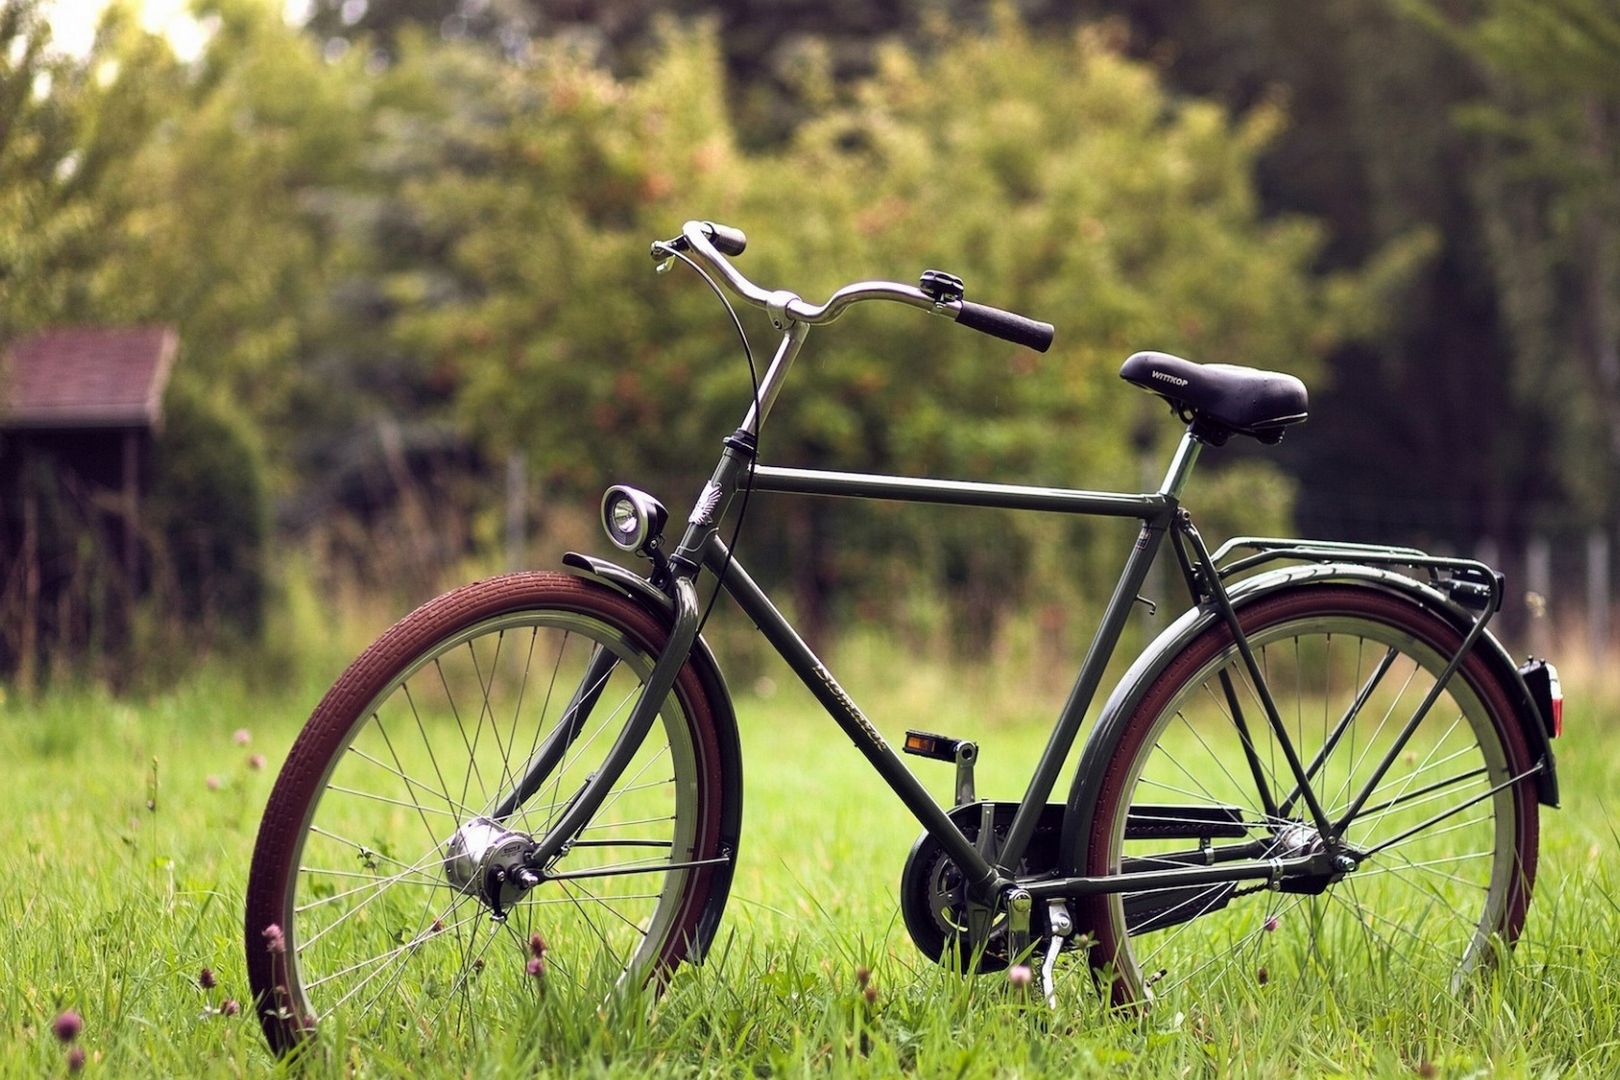 Creative_Wallpaper_Bicycle_on_the_grass_079830_ копия